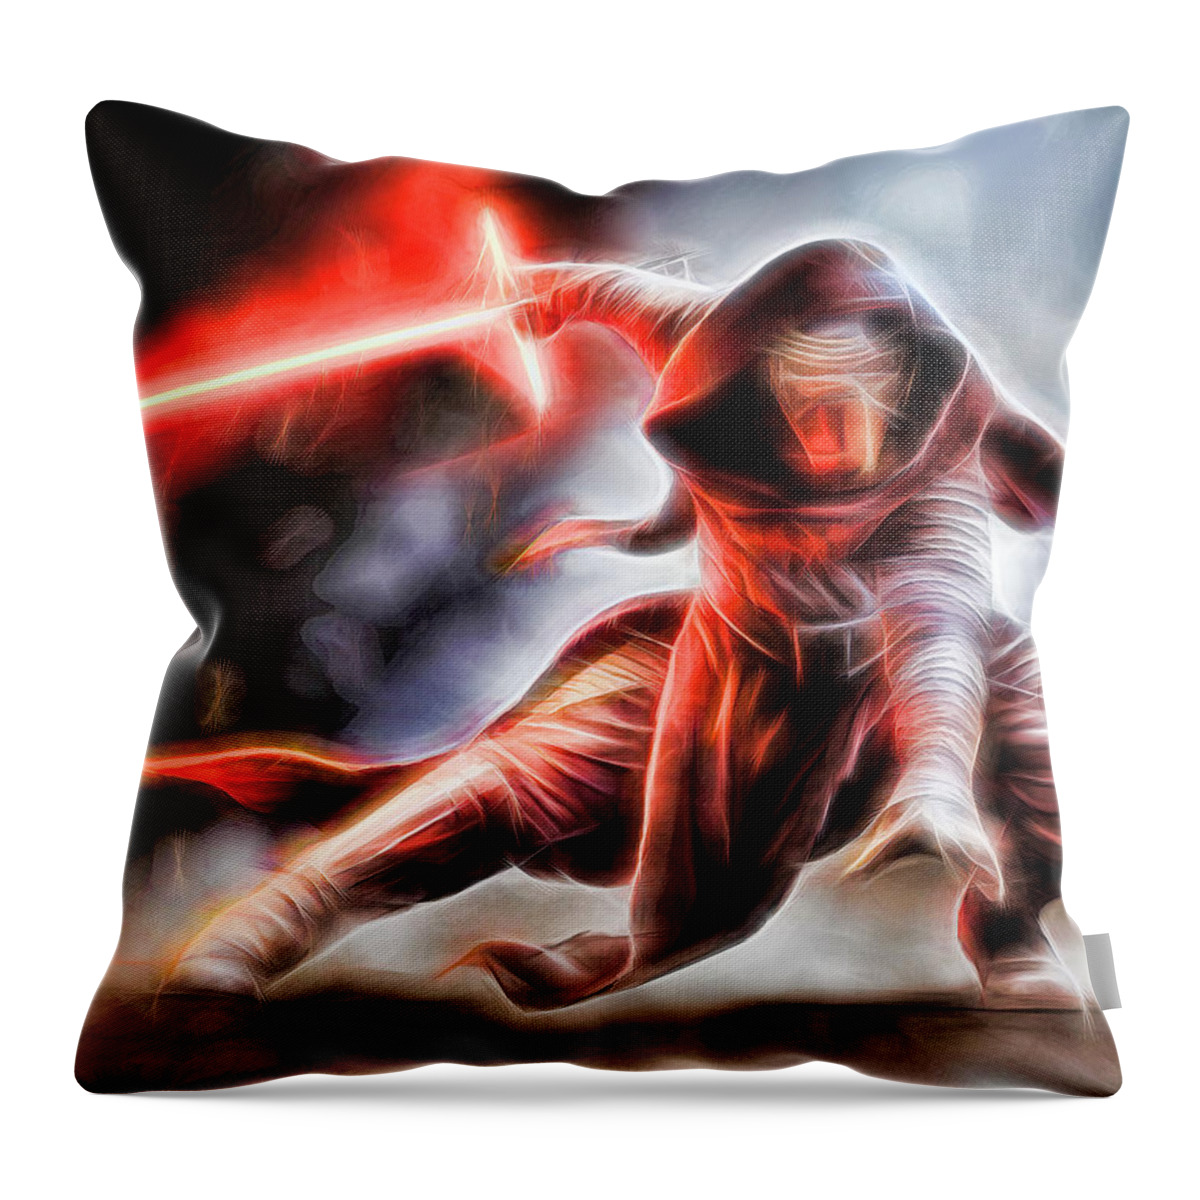 Starwars Throw Pillow featuring the digital art Kylo Ren I Will Fulfill Our Destiny by Scott Campbell